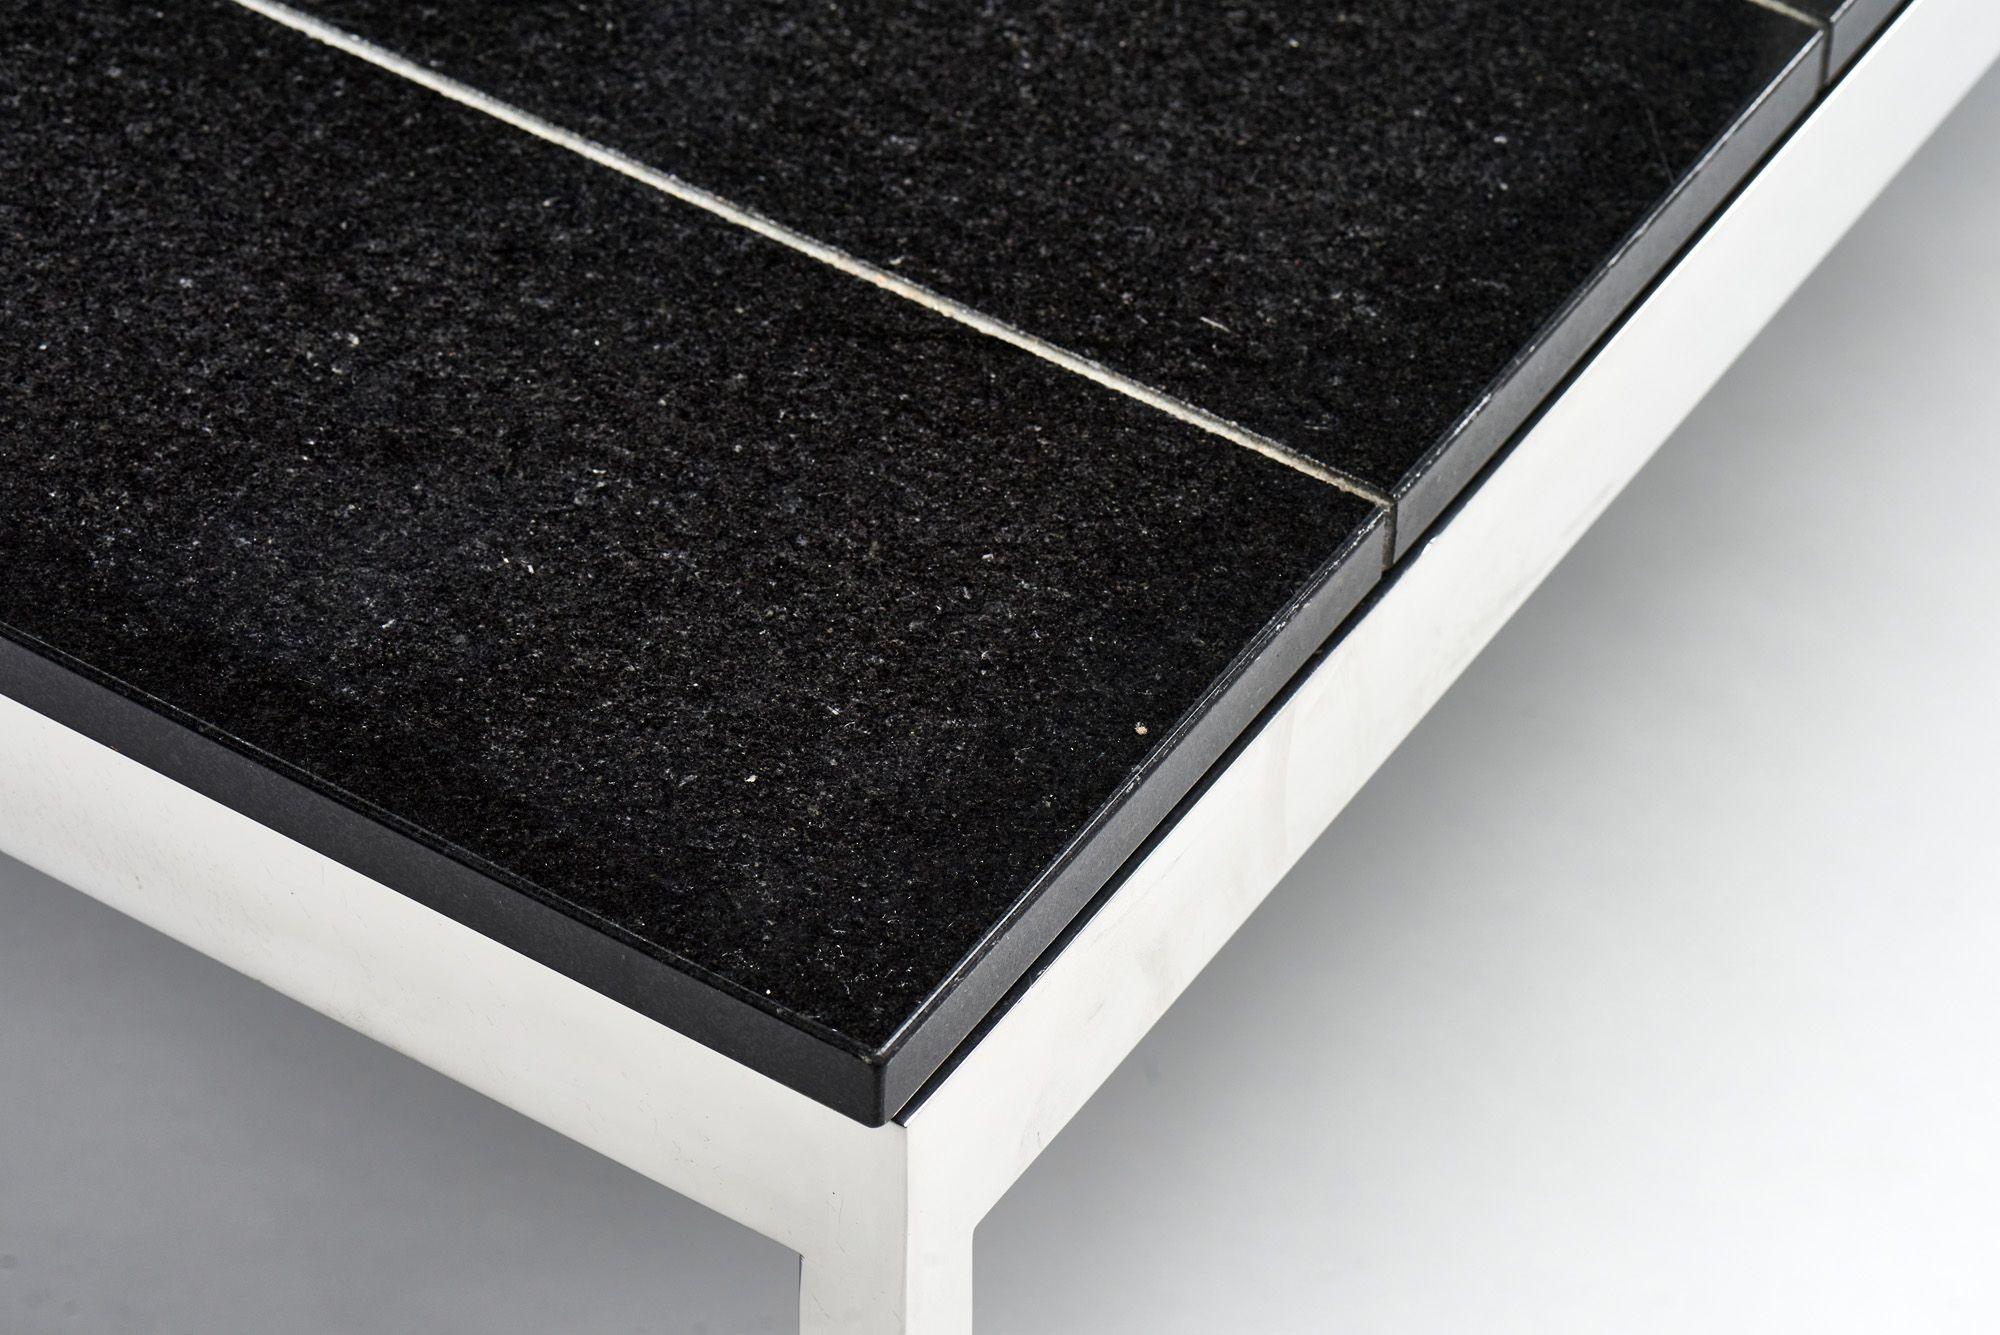 Knoll Black Granite and Stainless Steel Coffee Table, 1970 In Good Condition For Sale In Chicago, IL